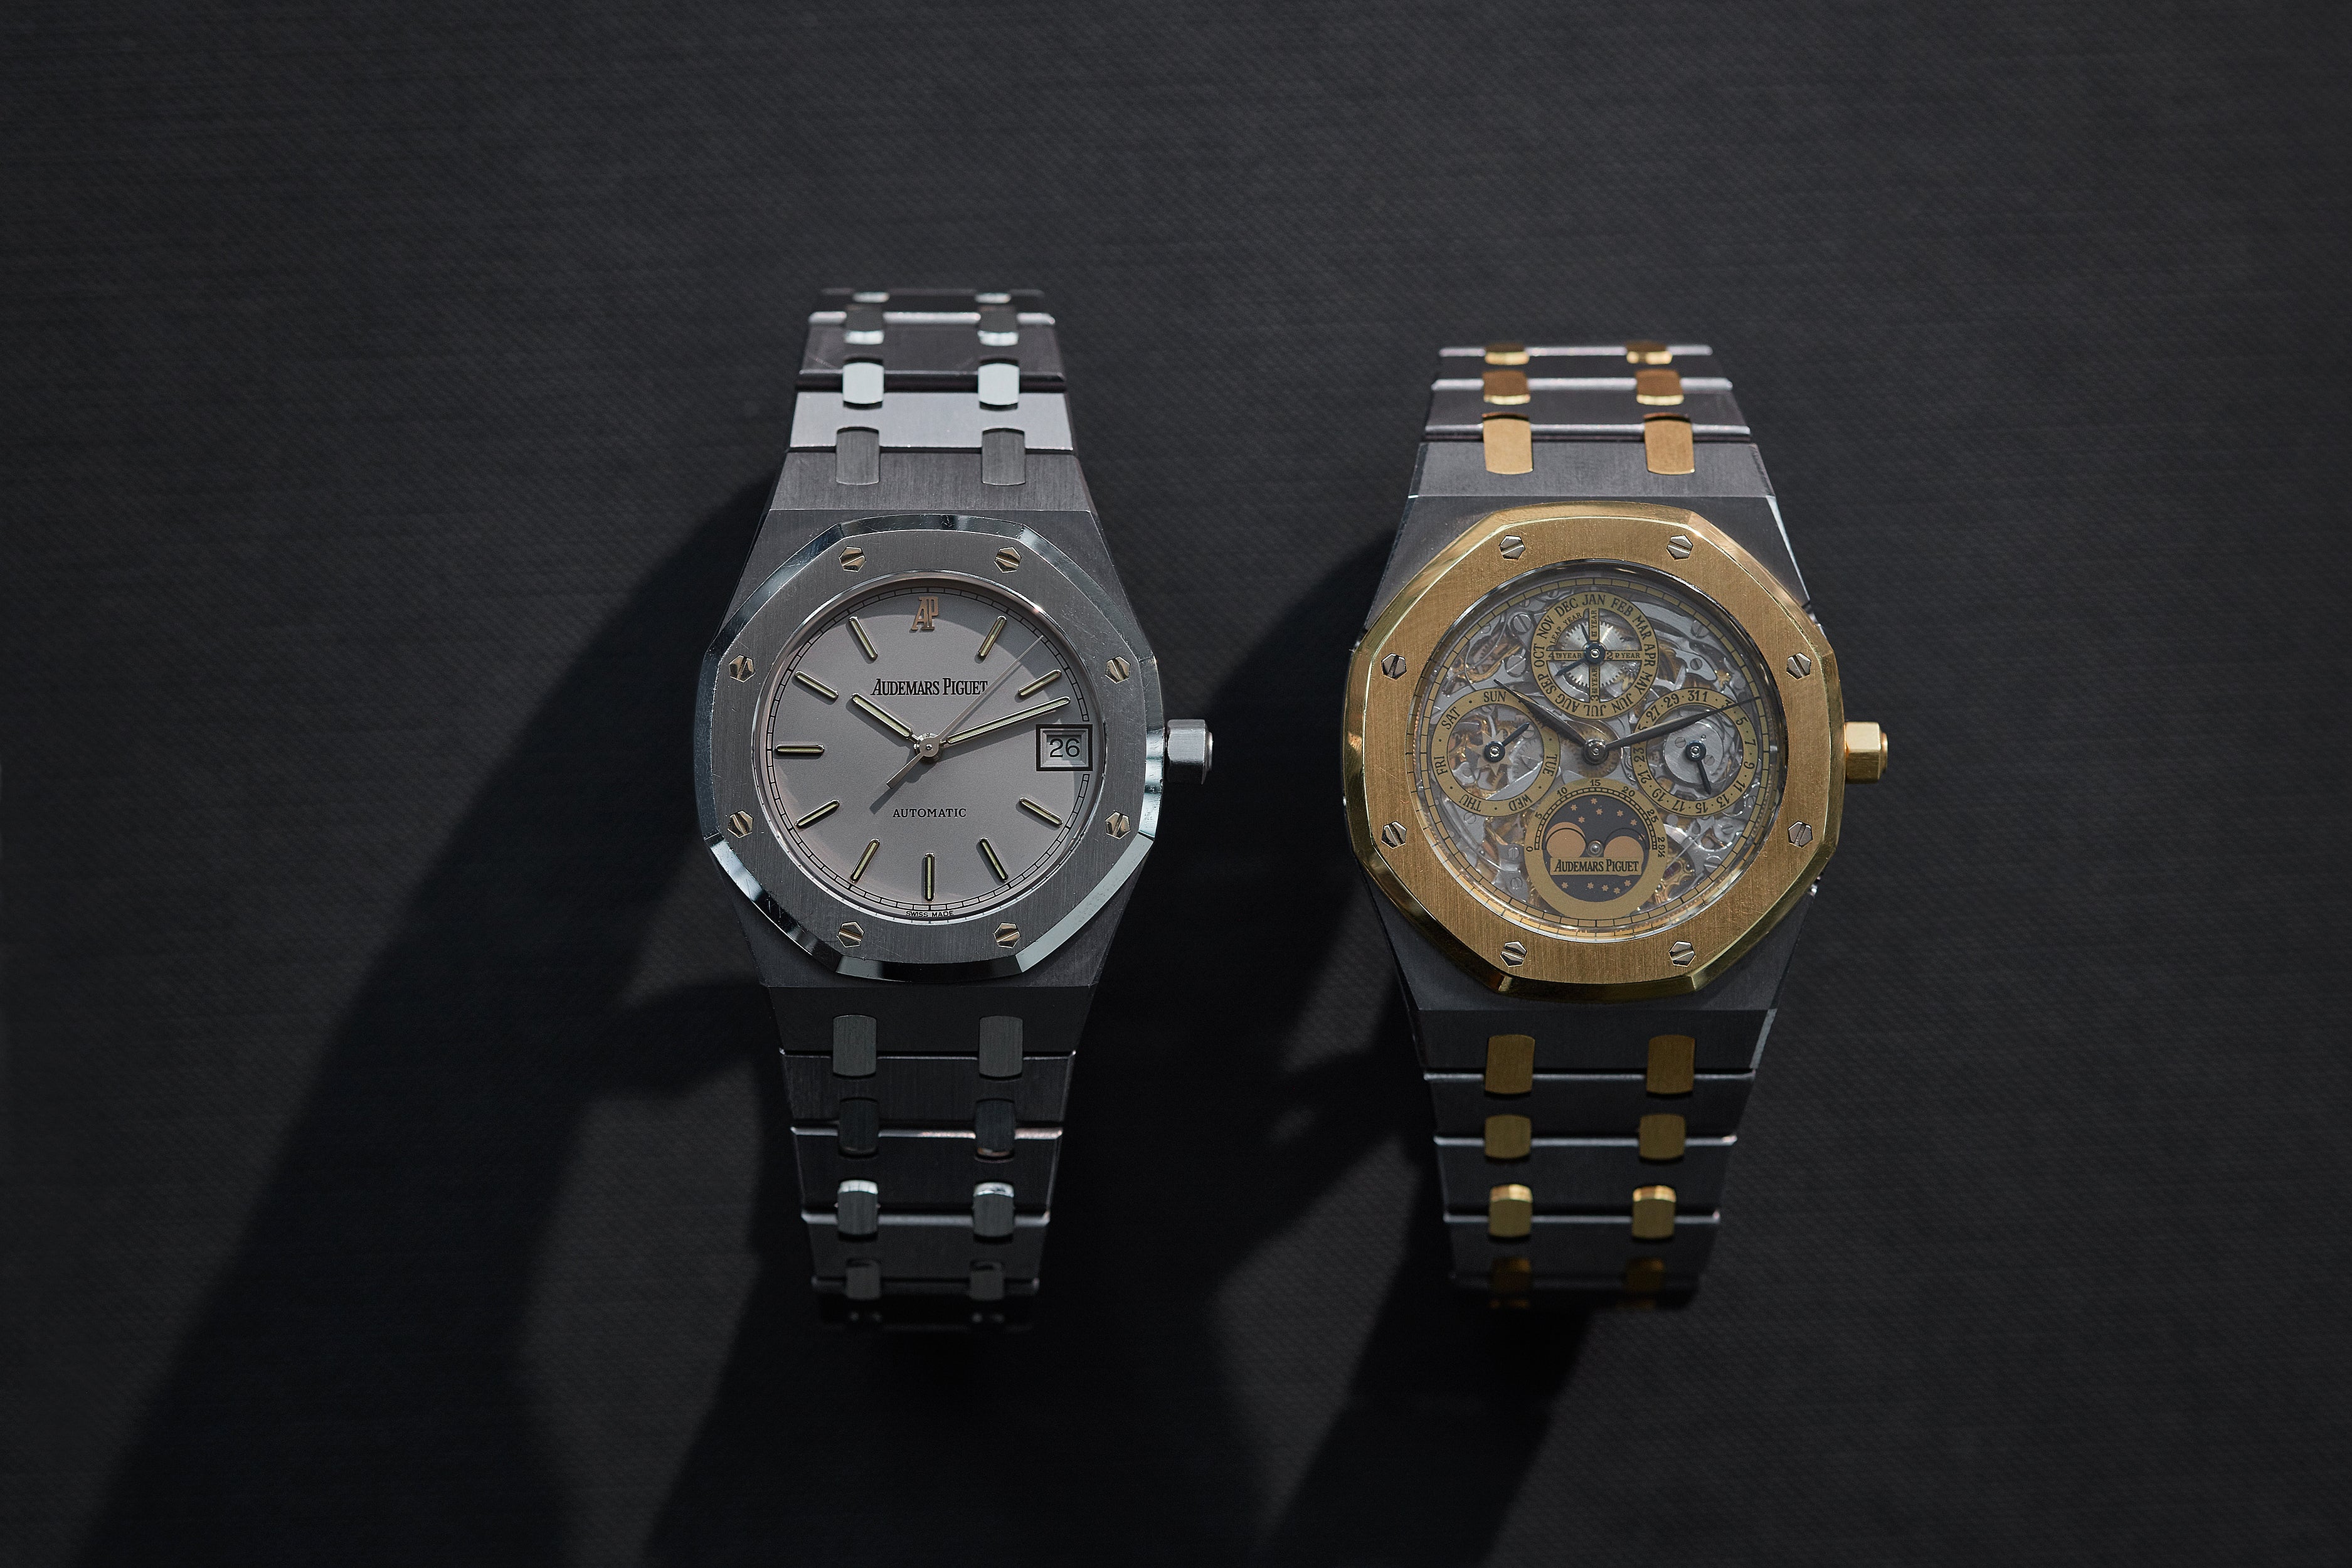 Audemars Piguet Royal Oak 14790 in Tantalum and steel next to a Royal Oak QP in Tantalum and rose gold for A Collected Man Lonodn